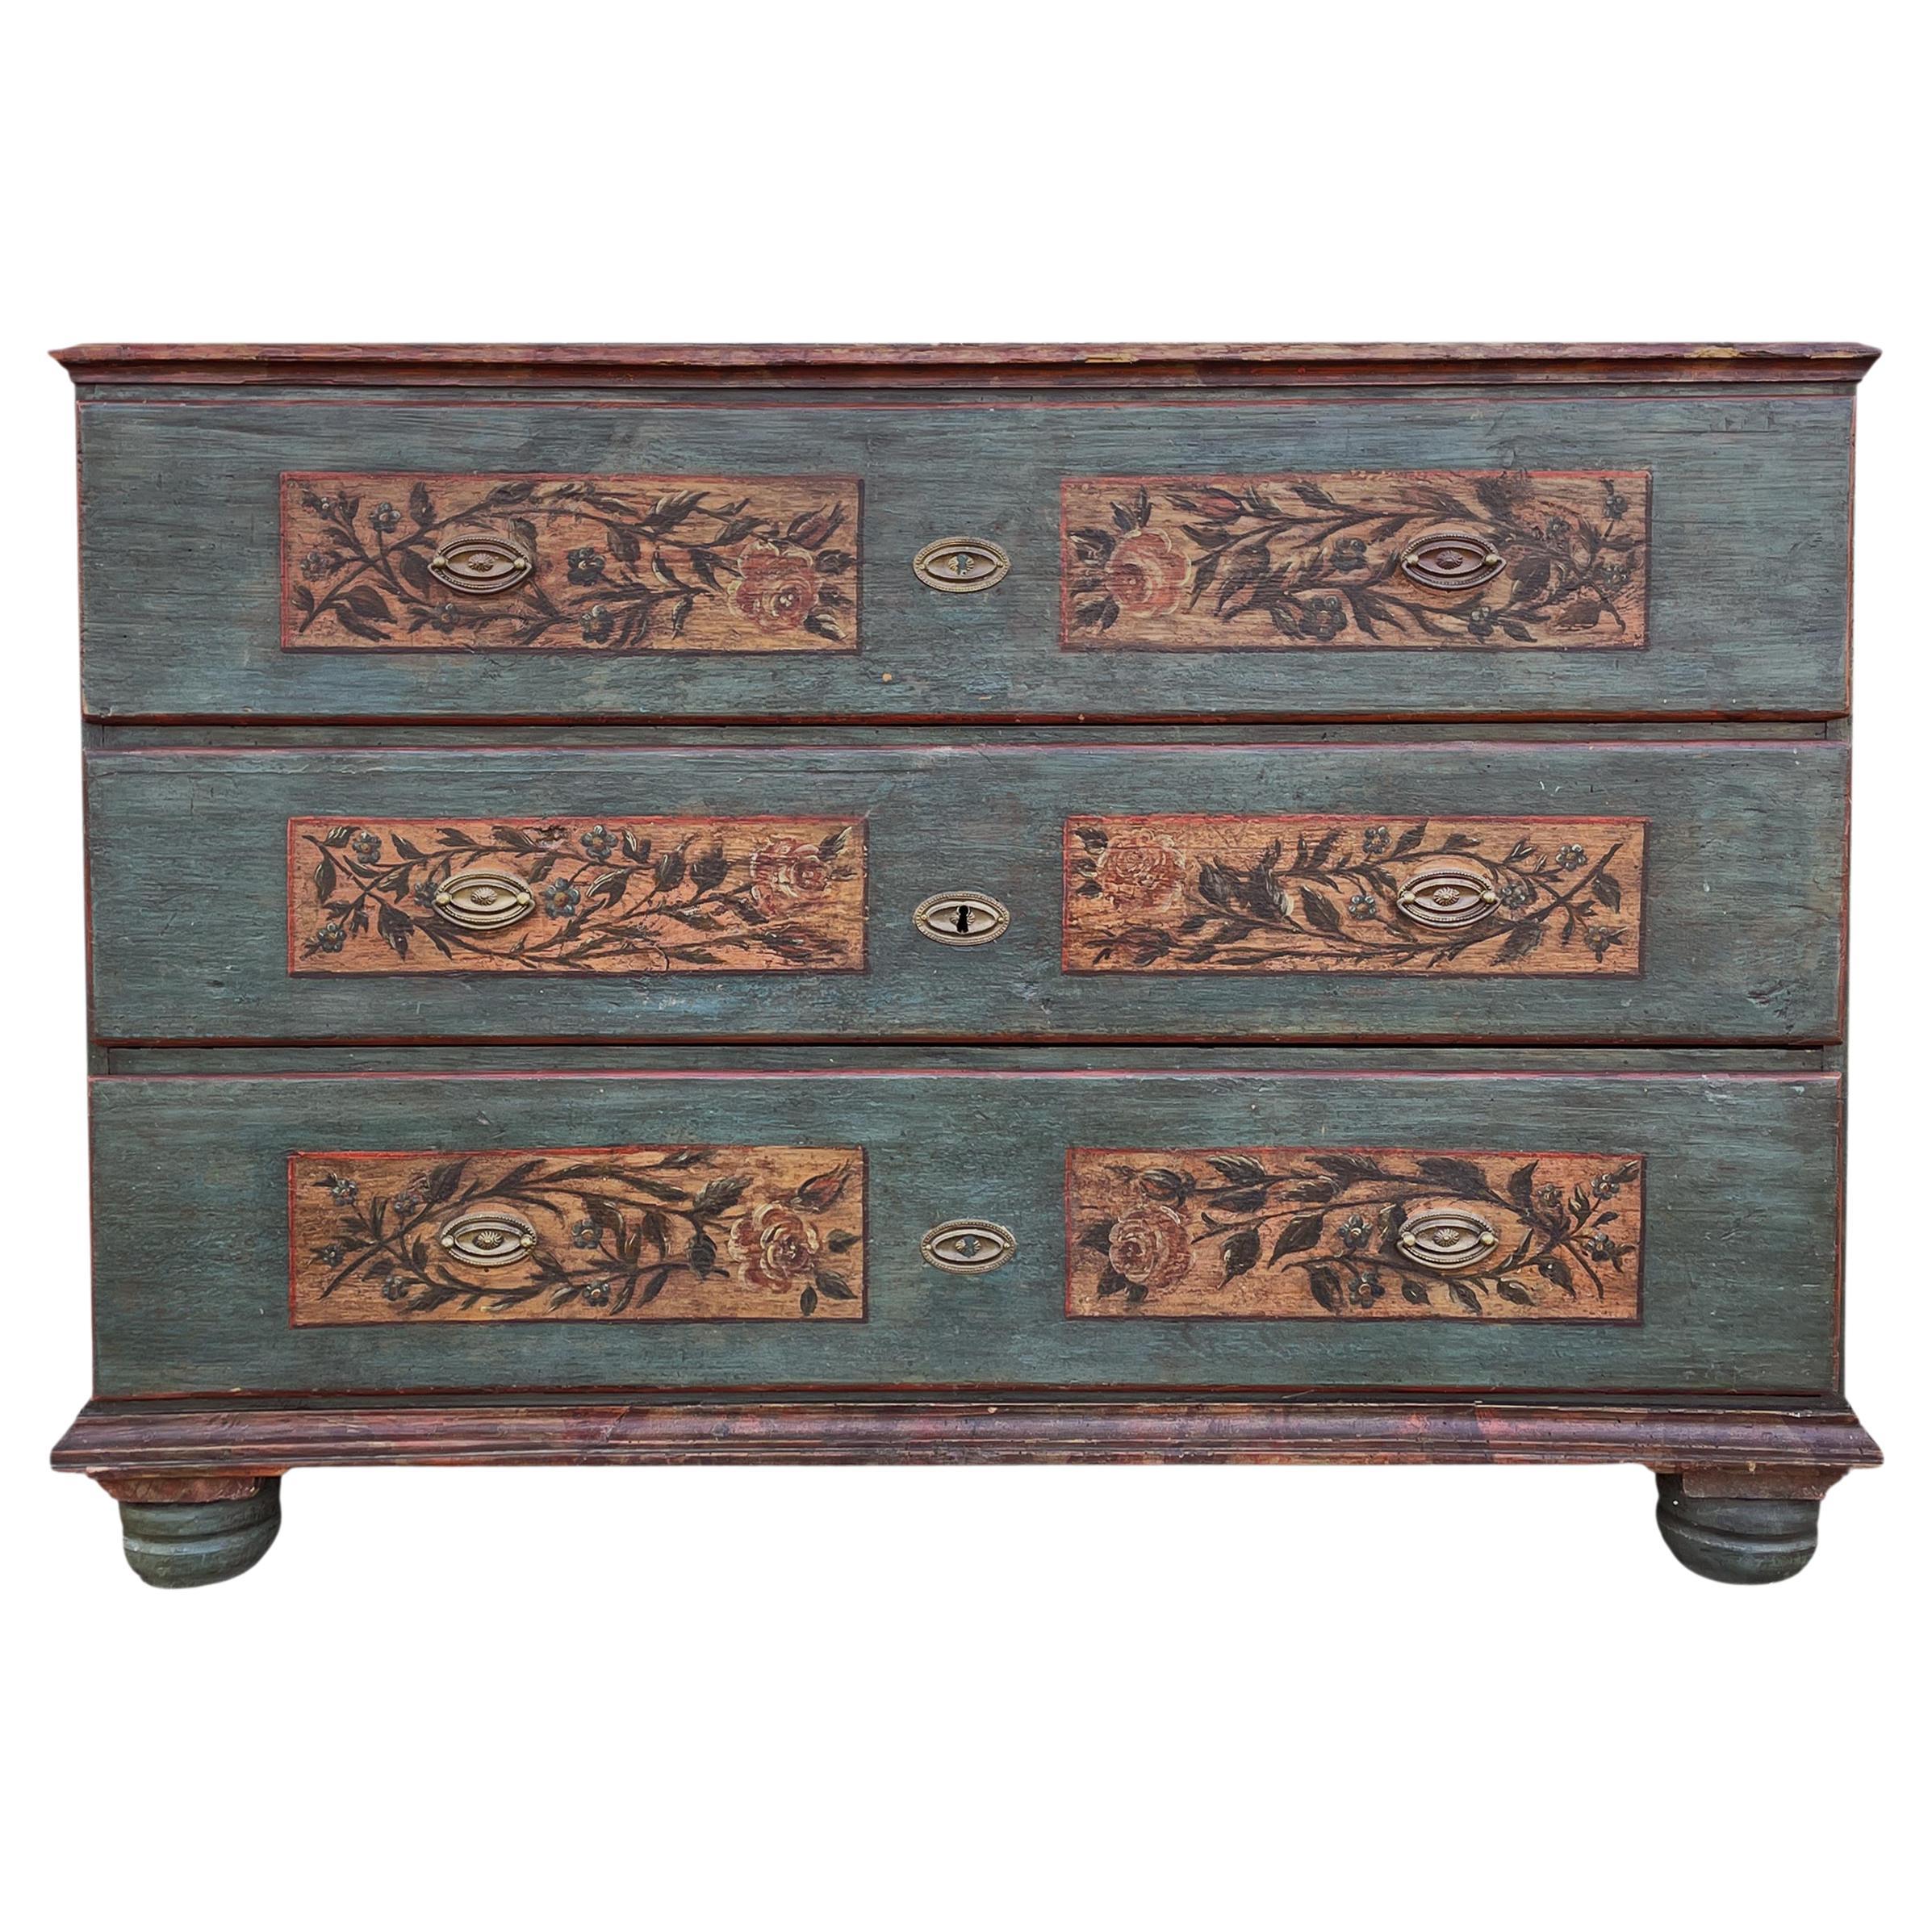 Blu Floral Painted Chest of Drawers, Northern Italy 1810